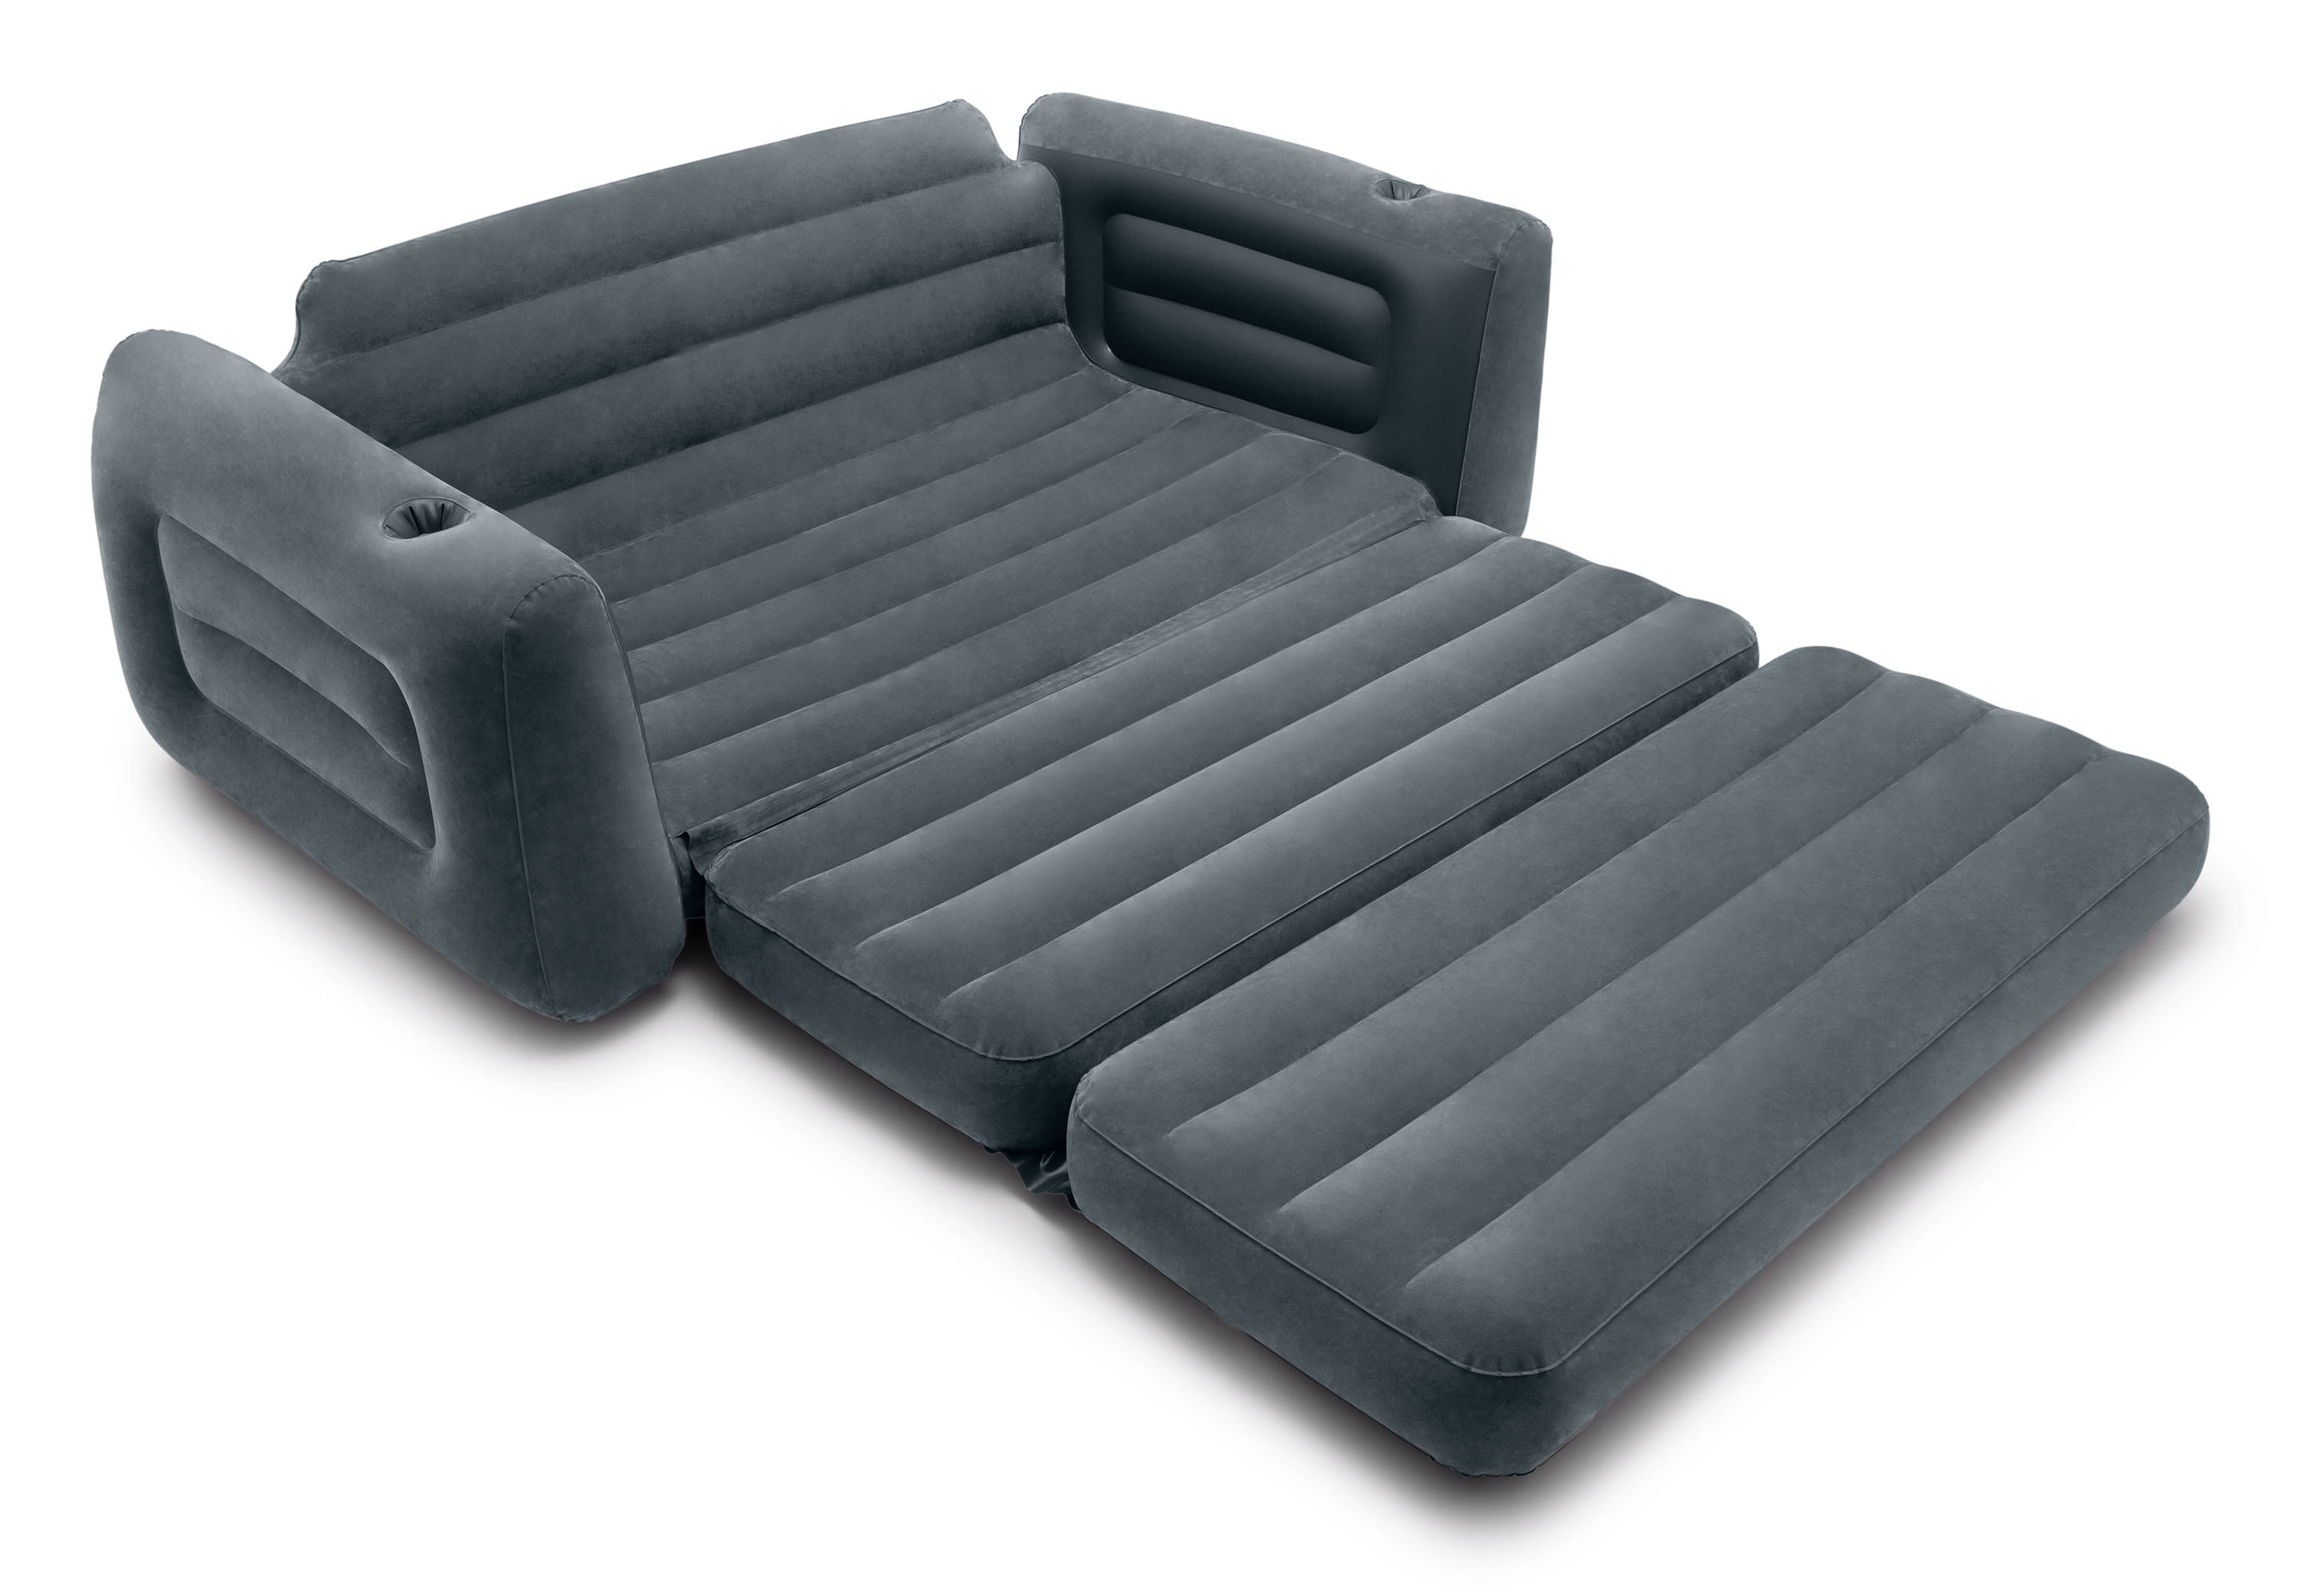 Details about   Sofa Bed Sleeper Queen Size Inflatable Air Folding Futon Convertible Gray Couch 